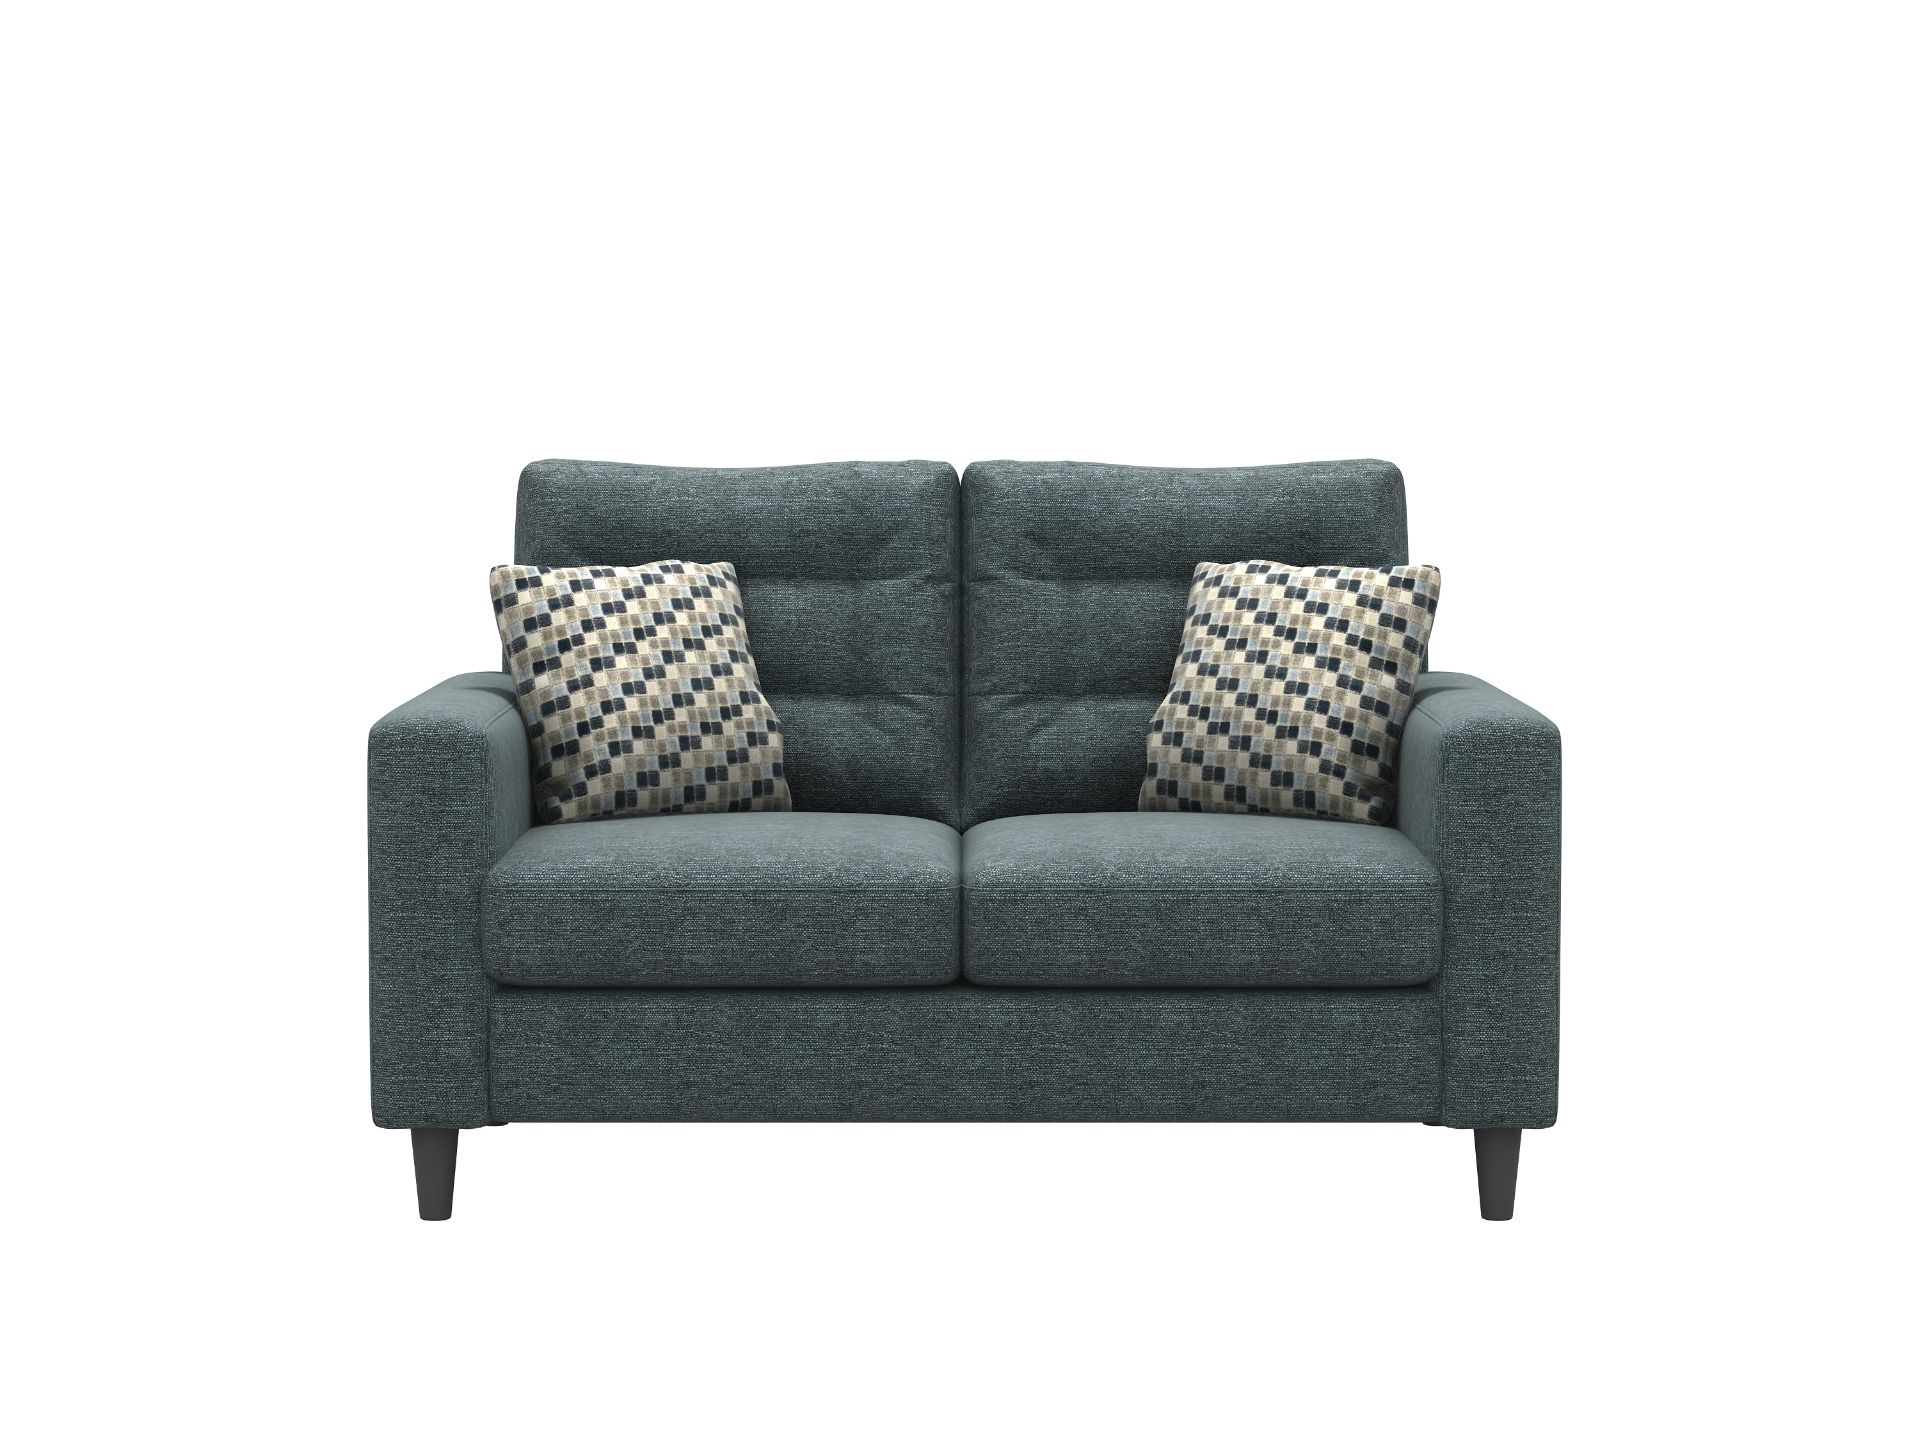 1x Cavendish Upholstery 2 Seater Icon Sofa, Handmade in the UK - Aosta Deep Blue - RRP ?1799 - New